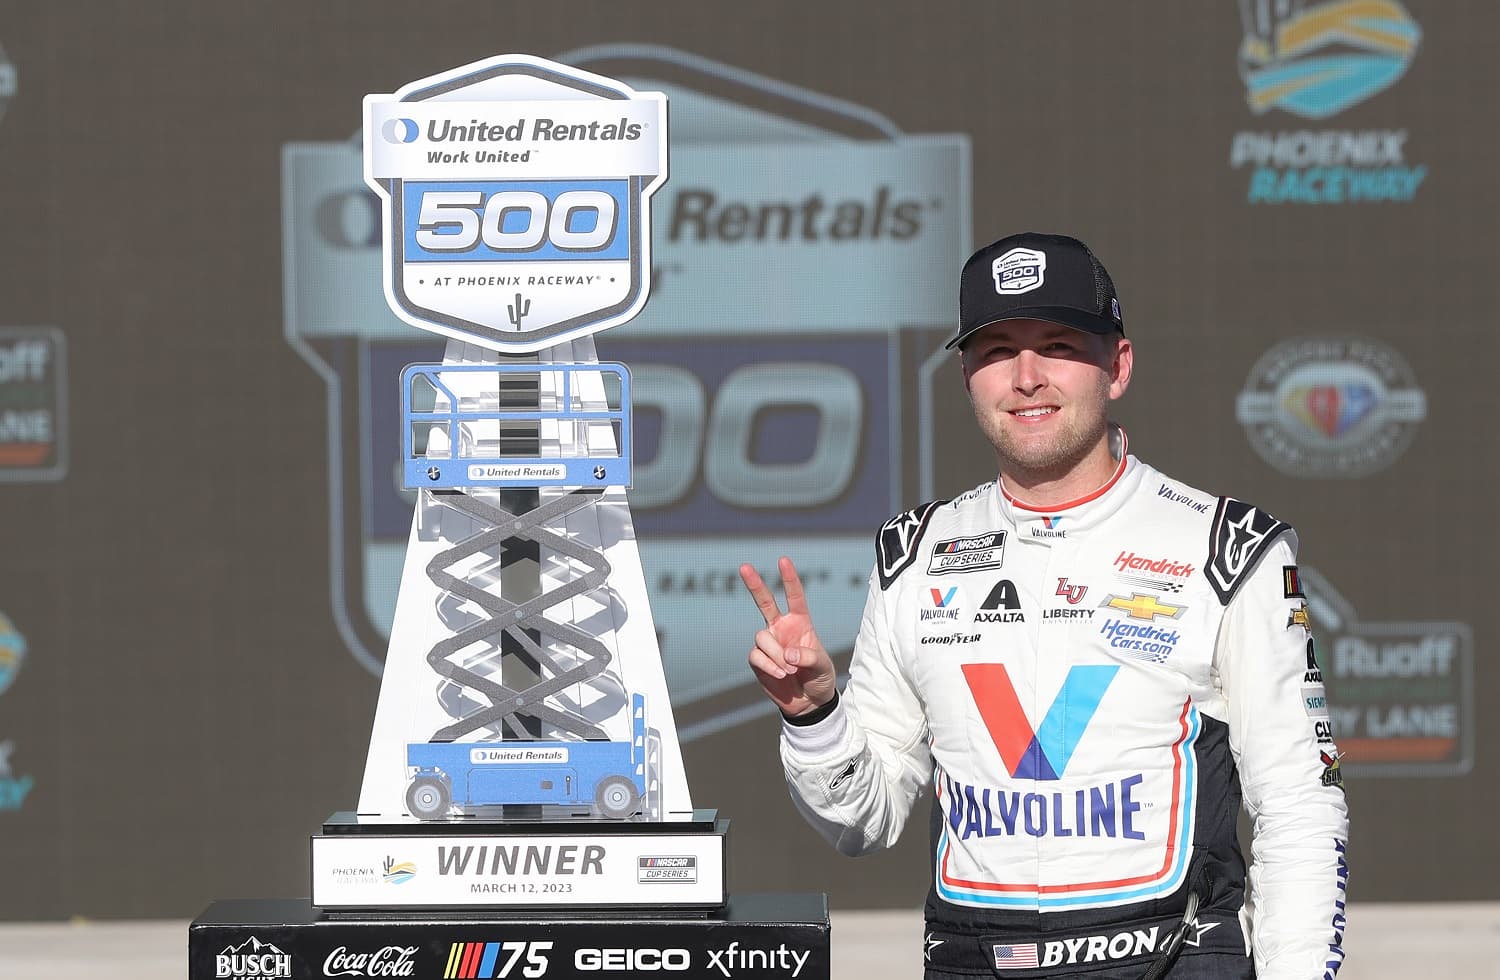 William Byron celebrates after winning the NASCAR Cup Series United Rentals Work United 500 at Phoenix Raceway on March 12, 2023. | Meg Oliphant/Getty Images